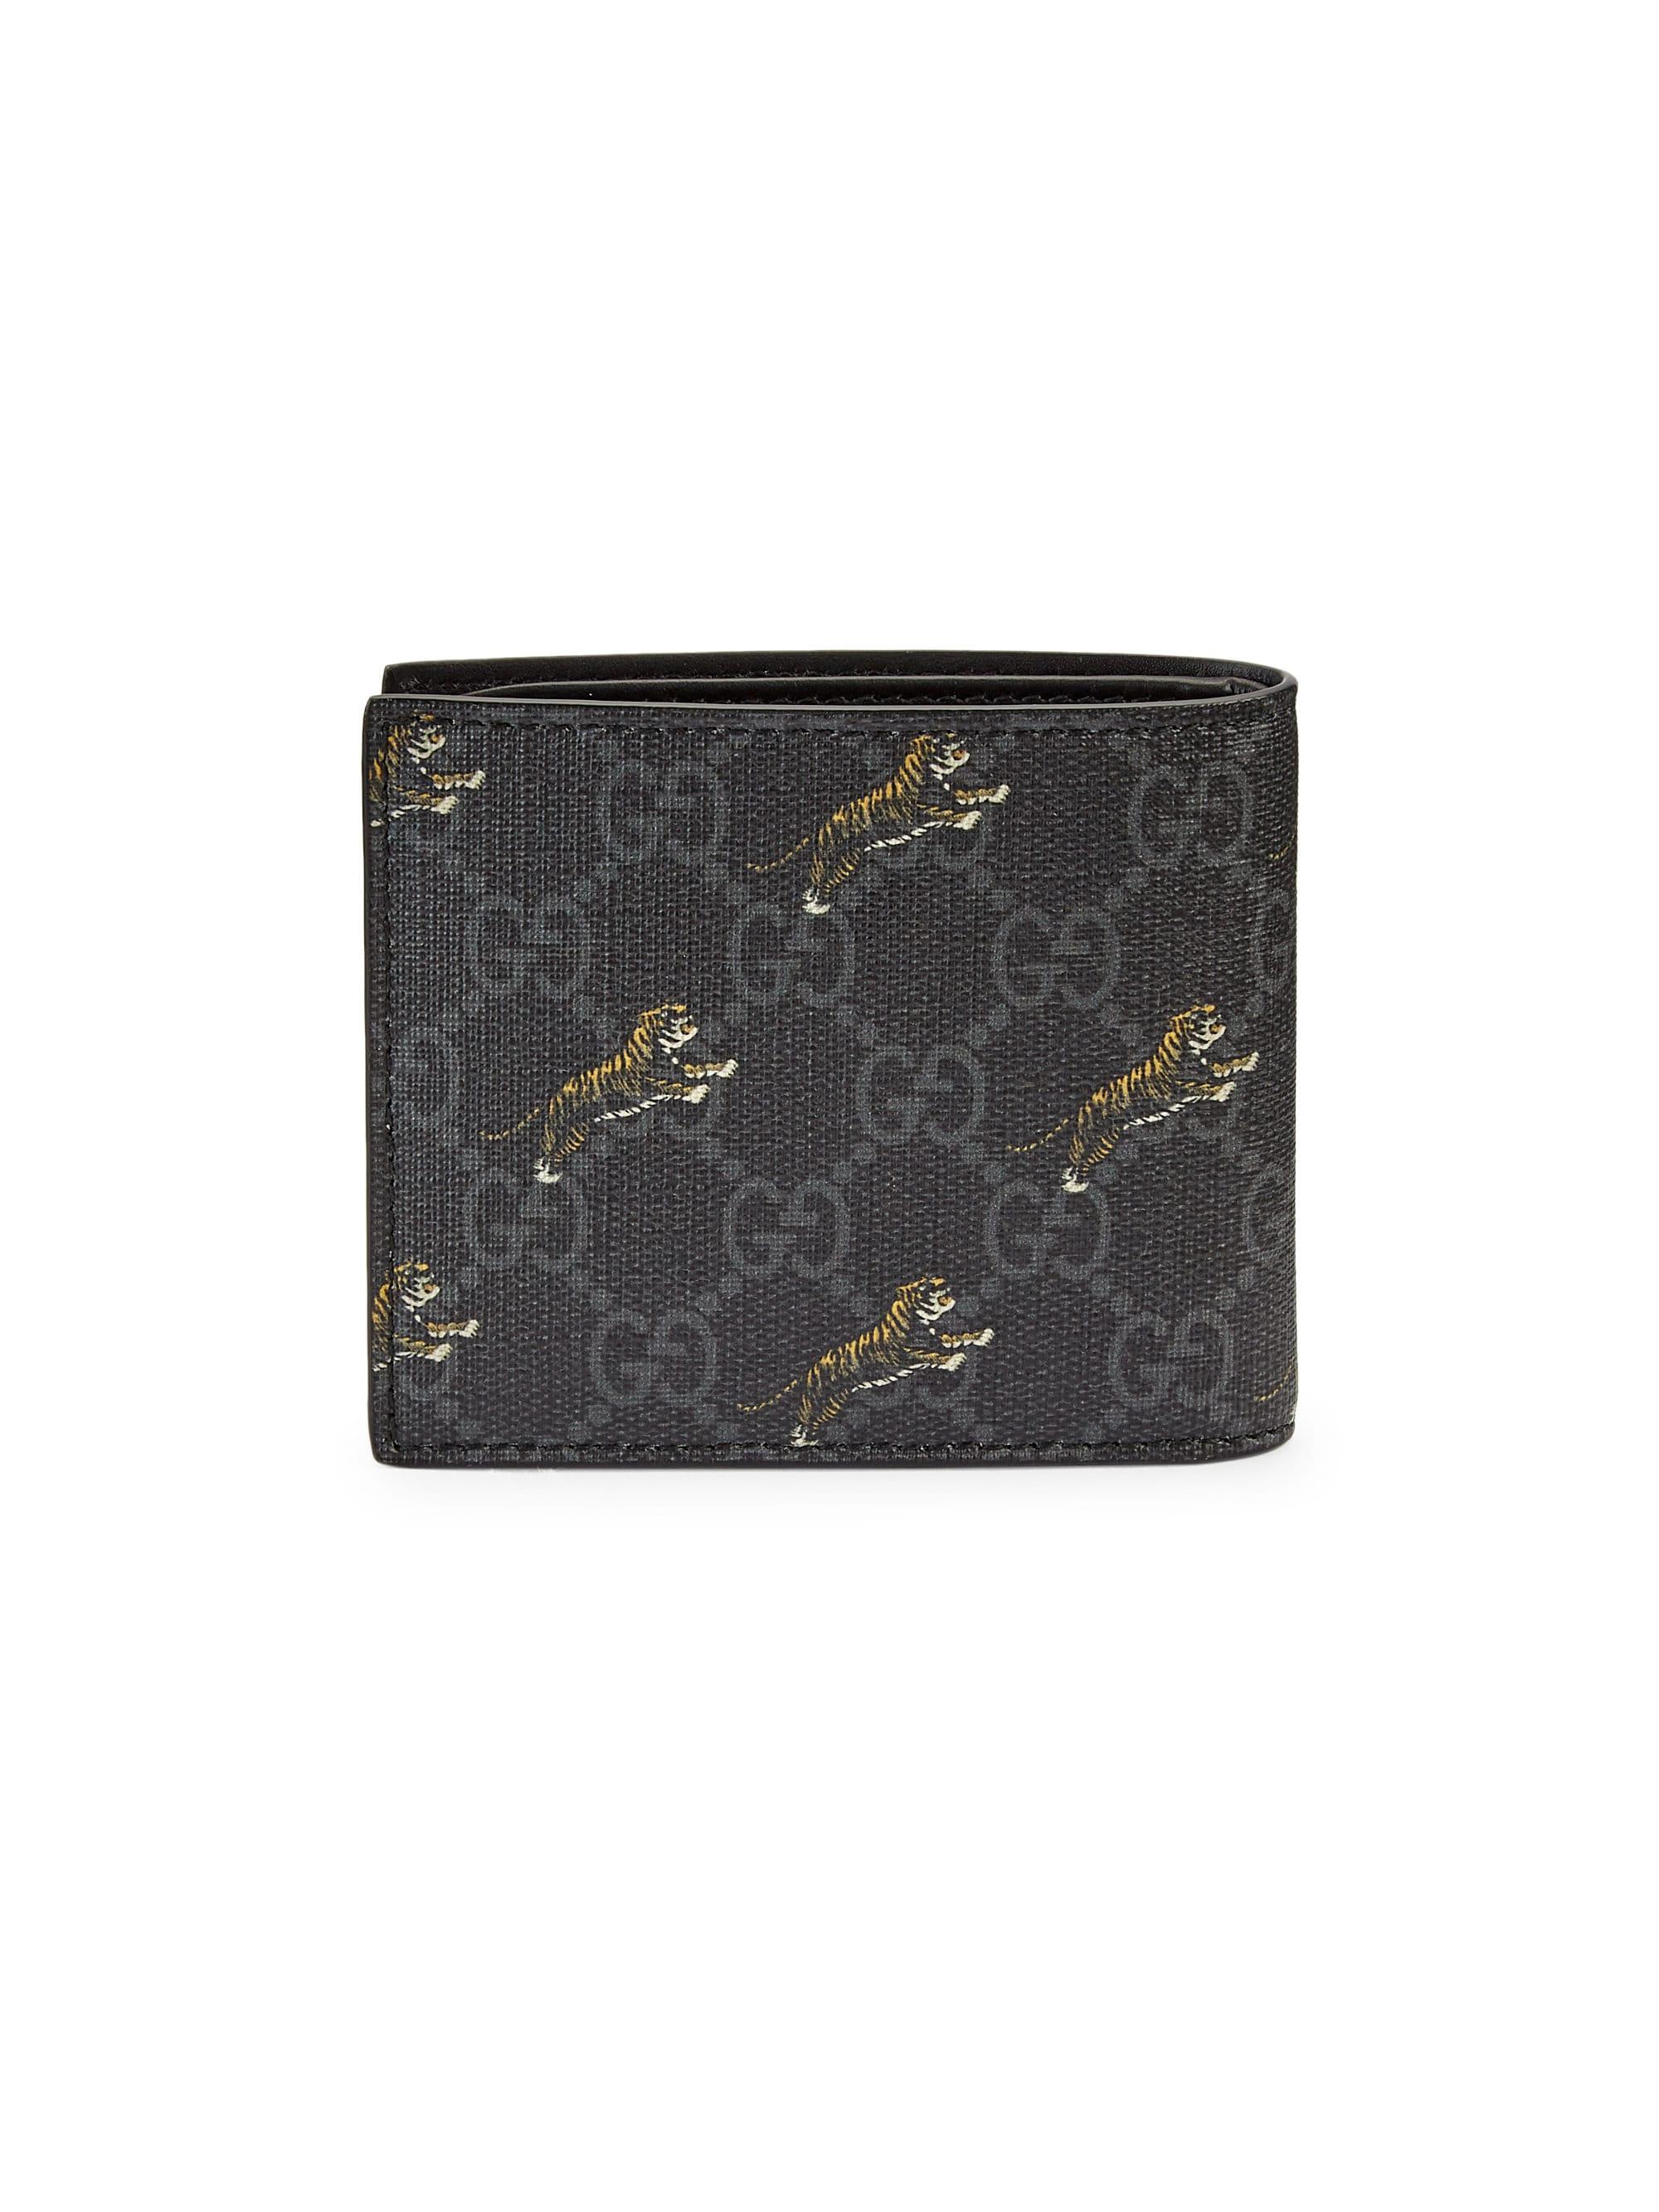 Gucci Canvas GG Coin Wallet With Tiger Print in Black for Men - Lyst